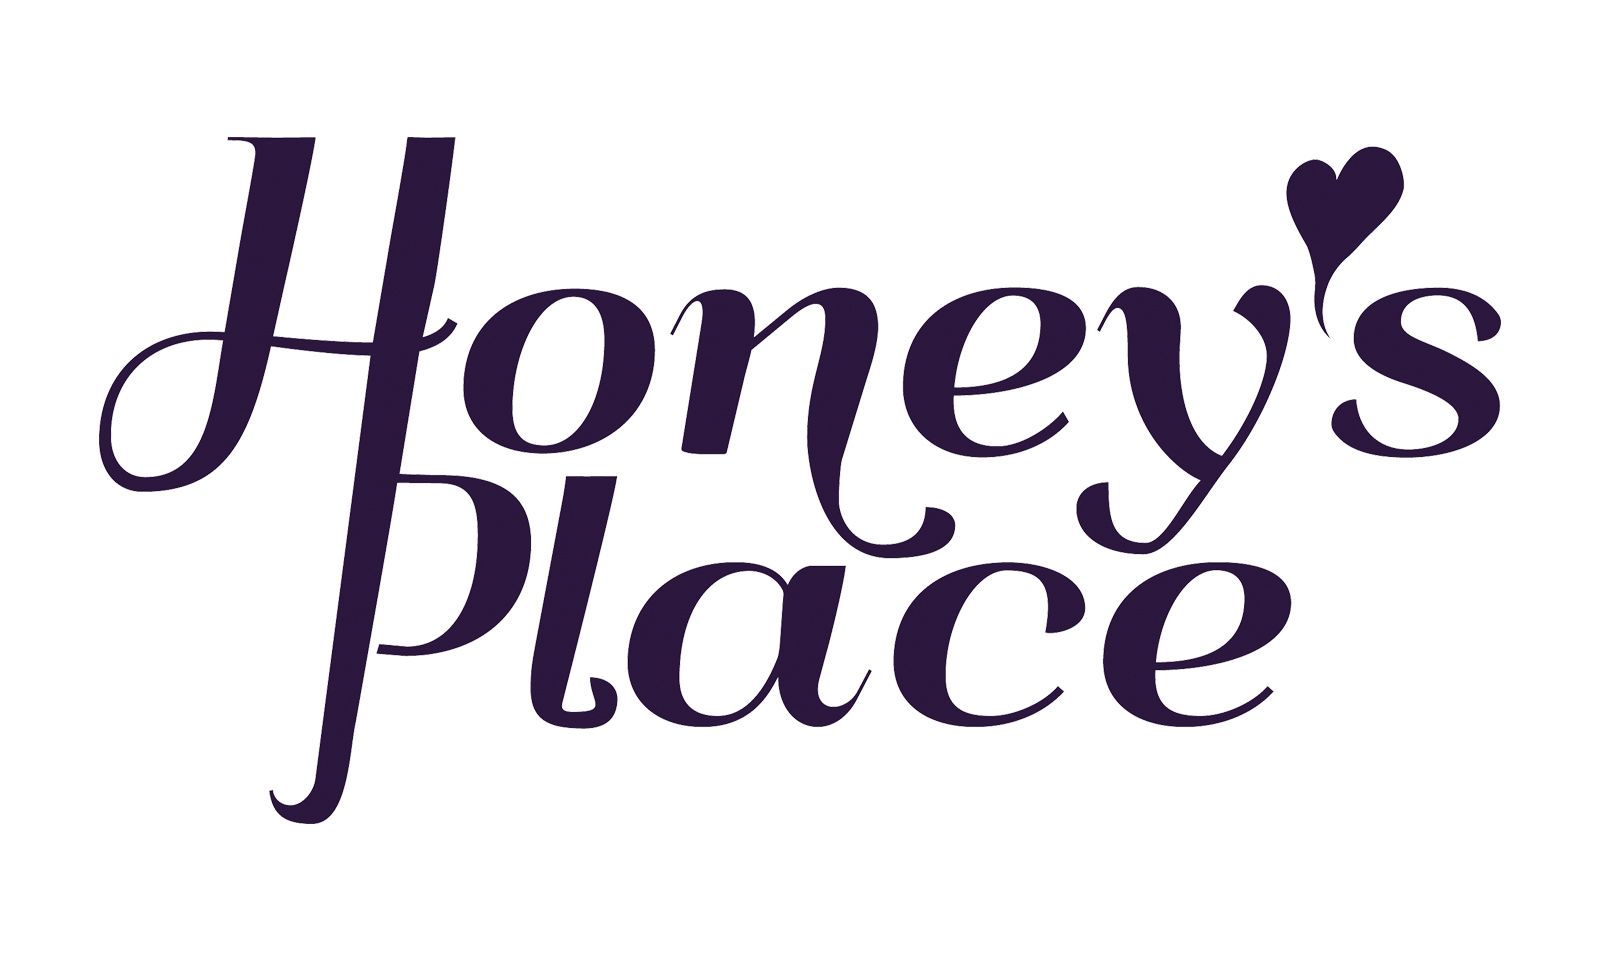 Womanizer Collection Now Available From Honey’s Place